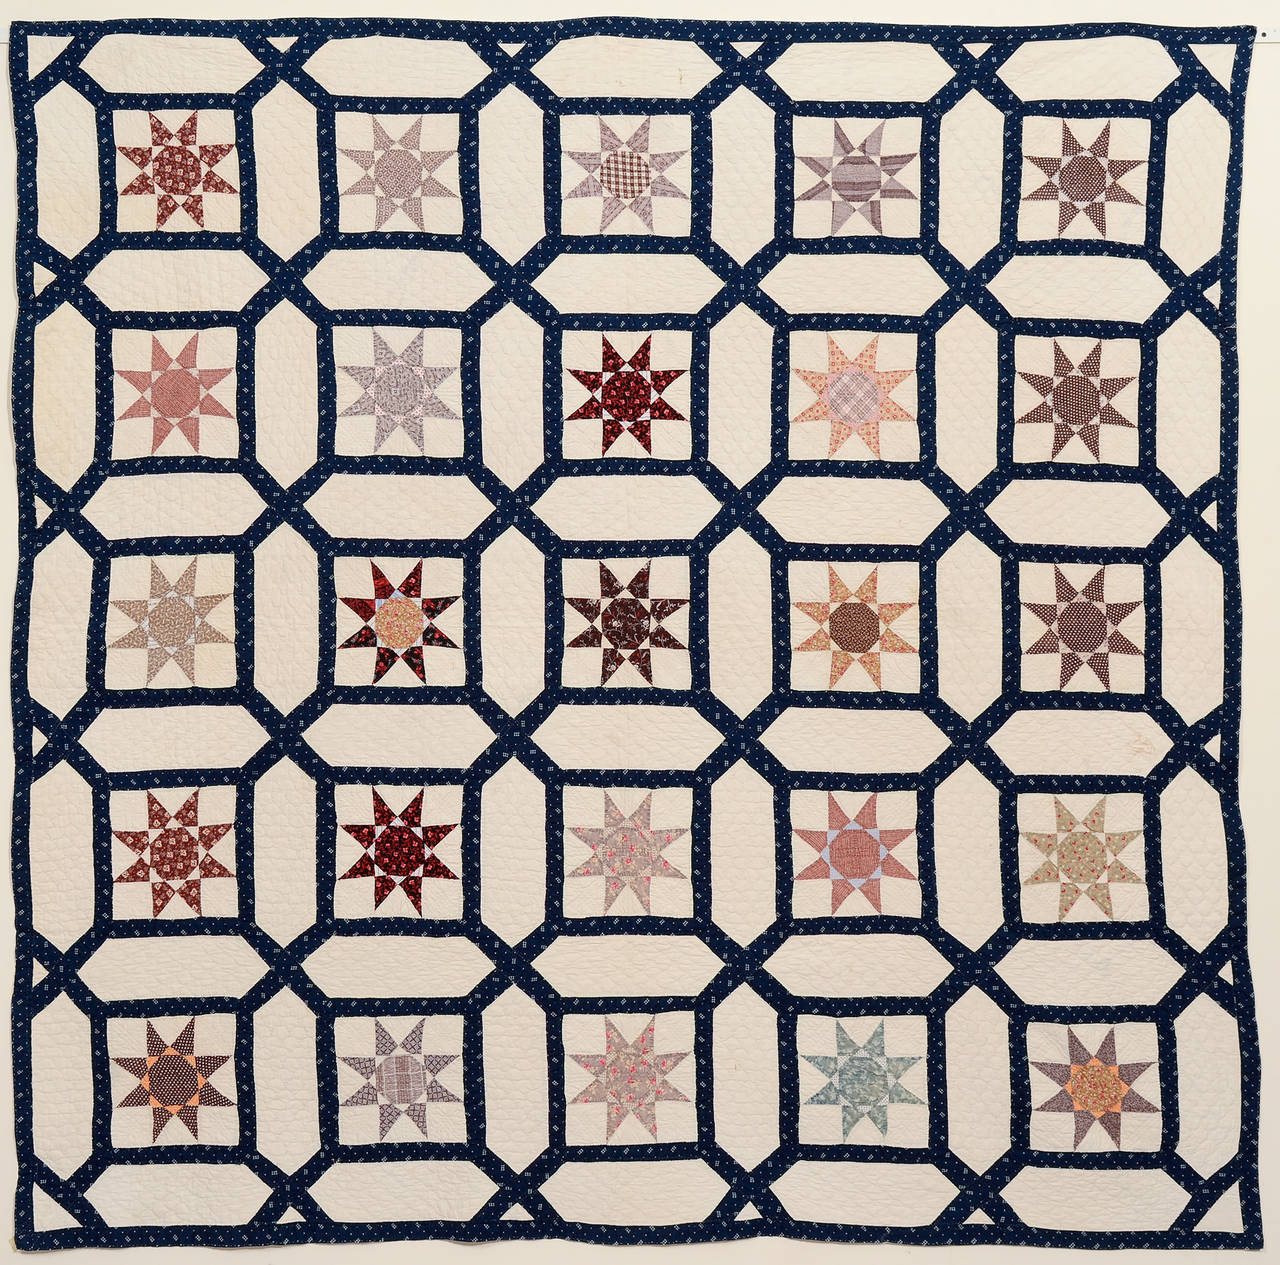 This interesting quilt actually combines three different patterns. The garden maze is filled with eight point stars within which are the obscure pattern known as the car wheel. The car wheels are made of a nice variety of late 19th century printed